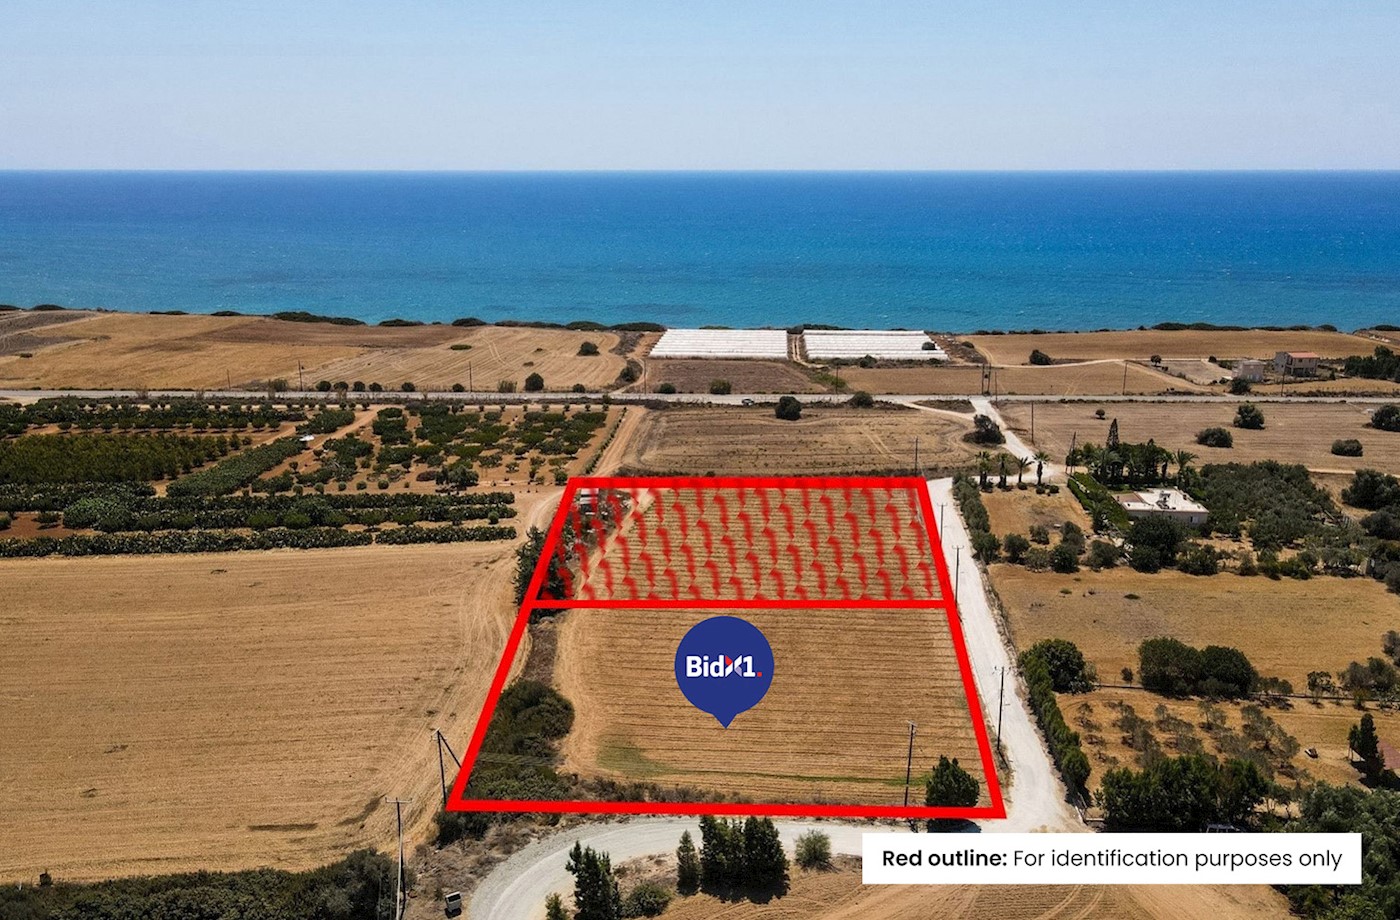 Touristic Field close to seafront in Agios Theodoros, Larnaca 1/4